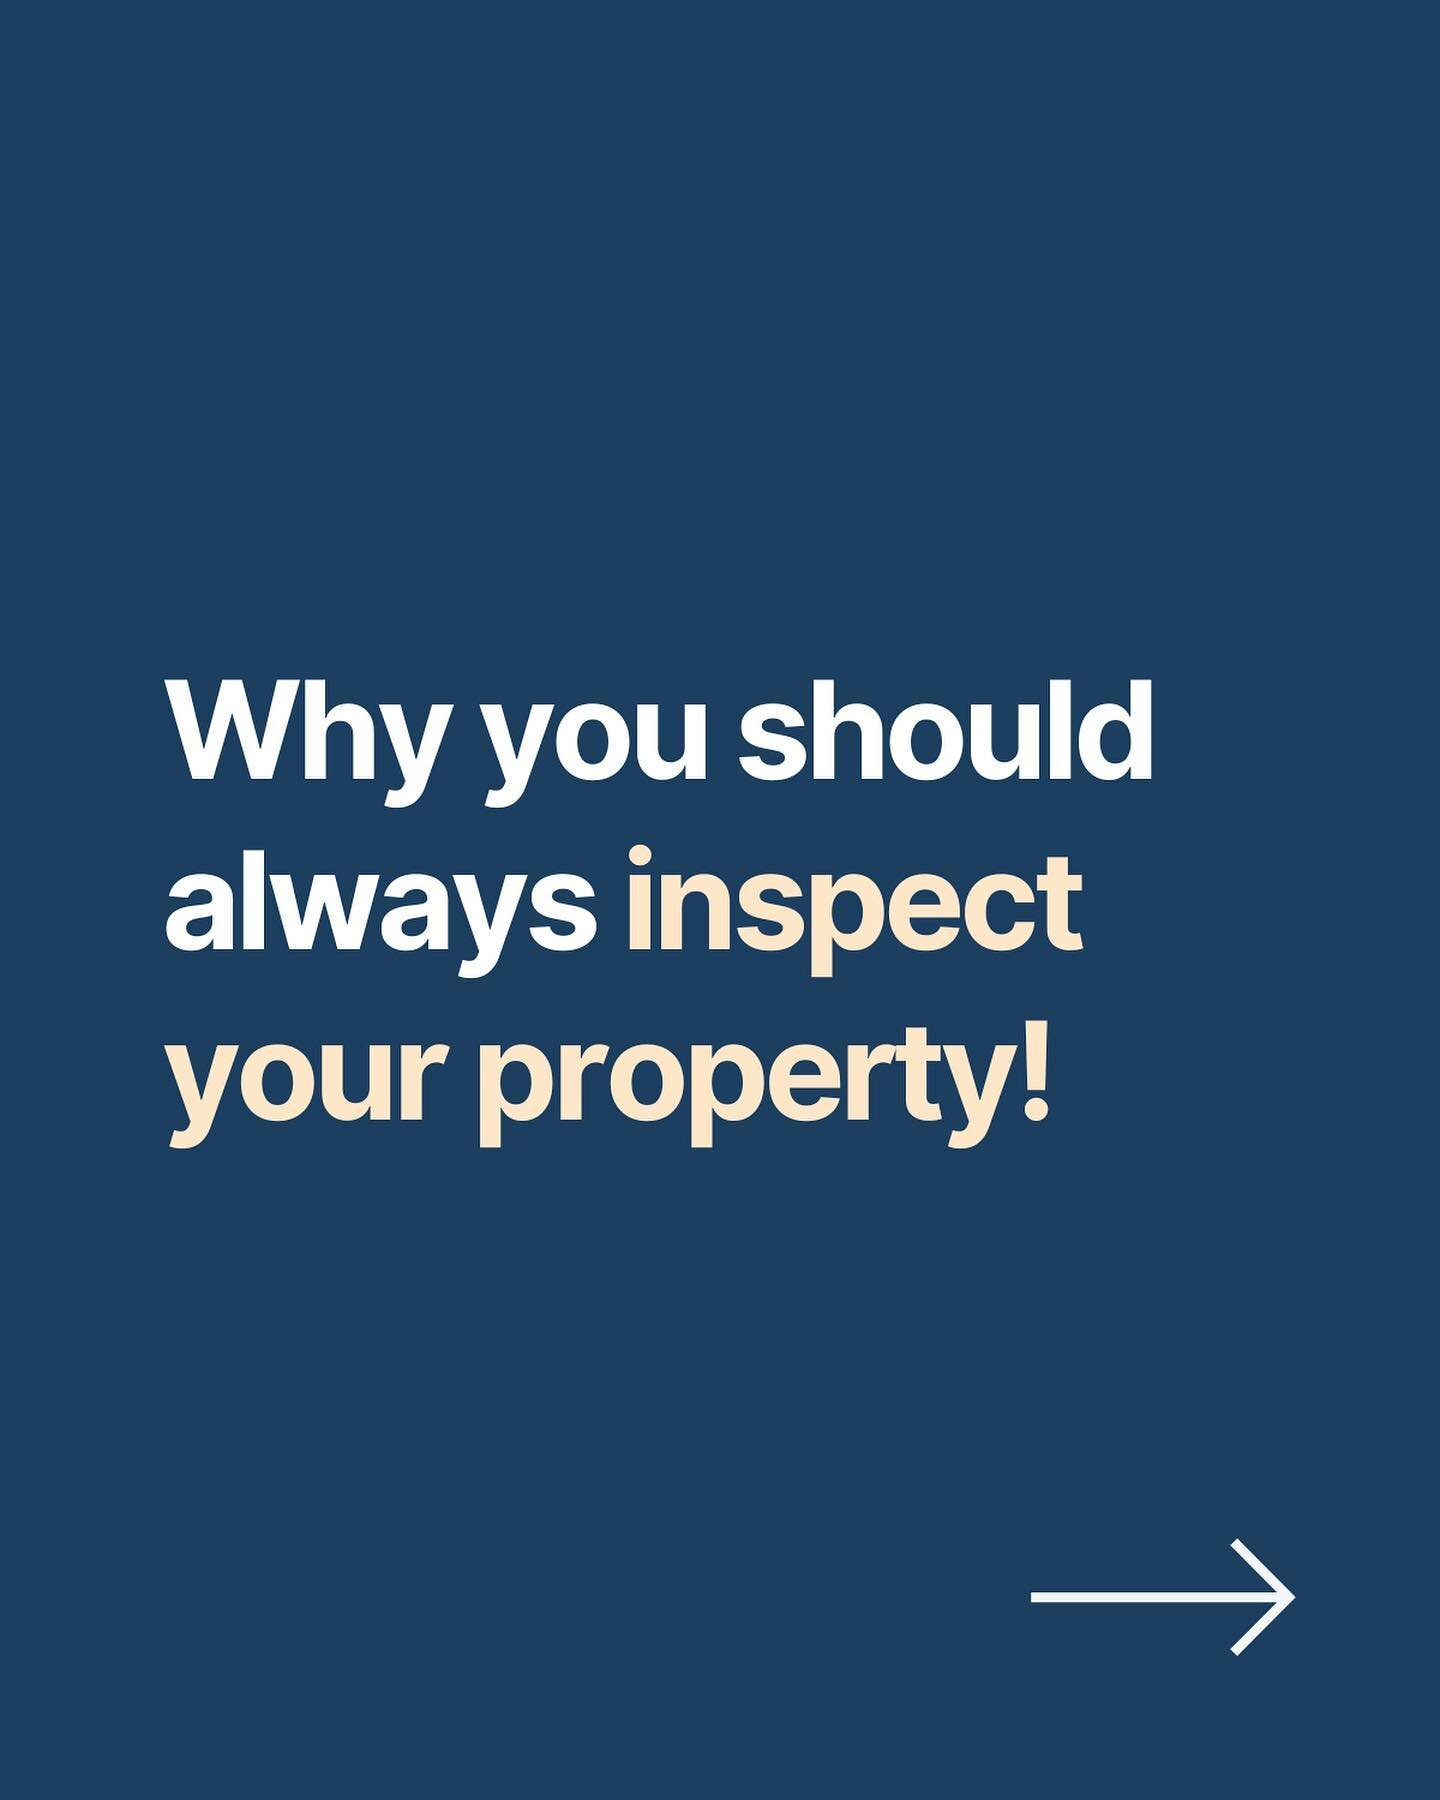 Always inspect your property! 🔍

What are property inspections? 🧐
Inspections are an important part of the investing journey. At this stage, your realtor would hire a professional home inspector, whose job will be to identify everything potentially